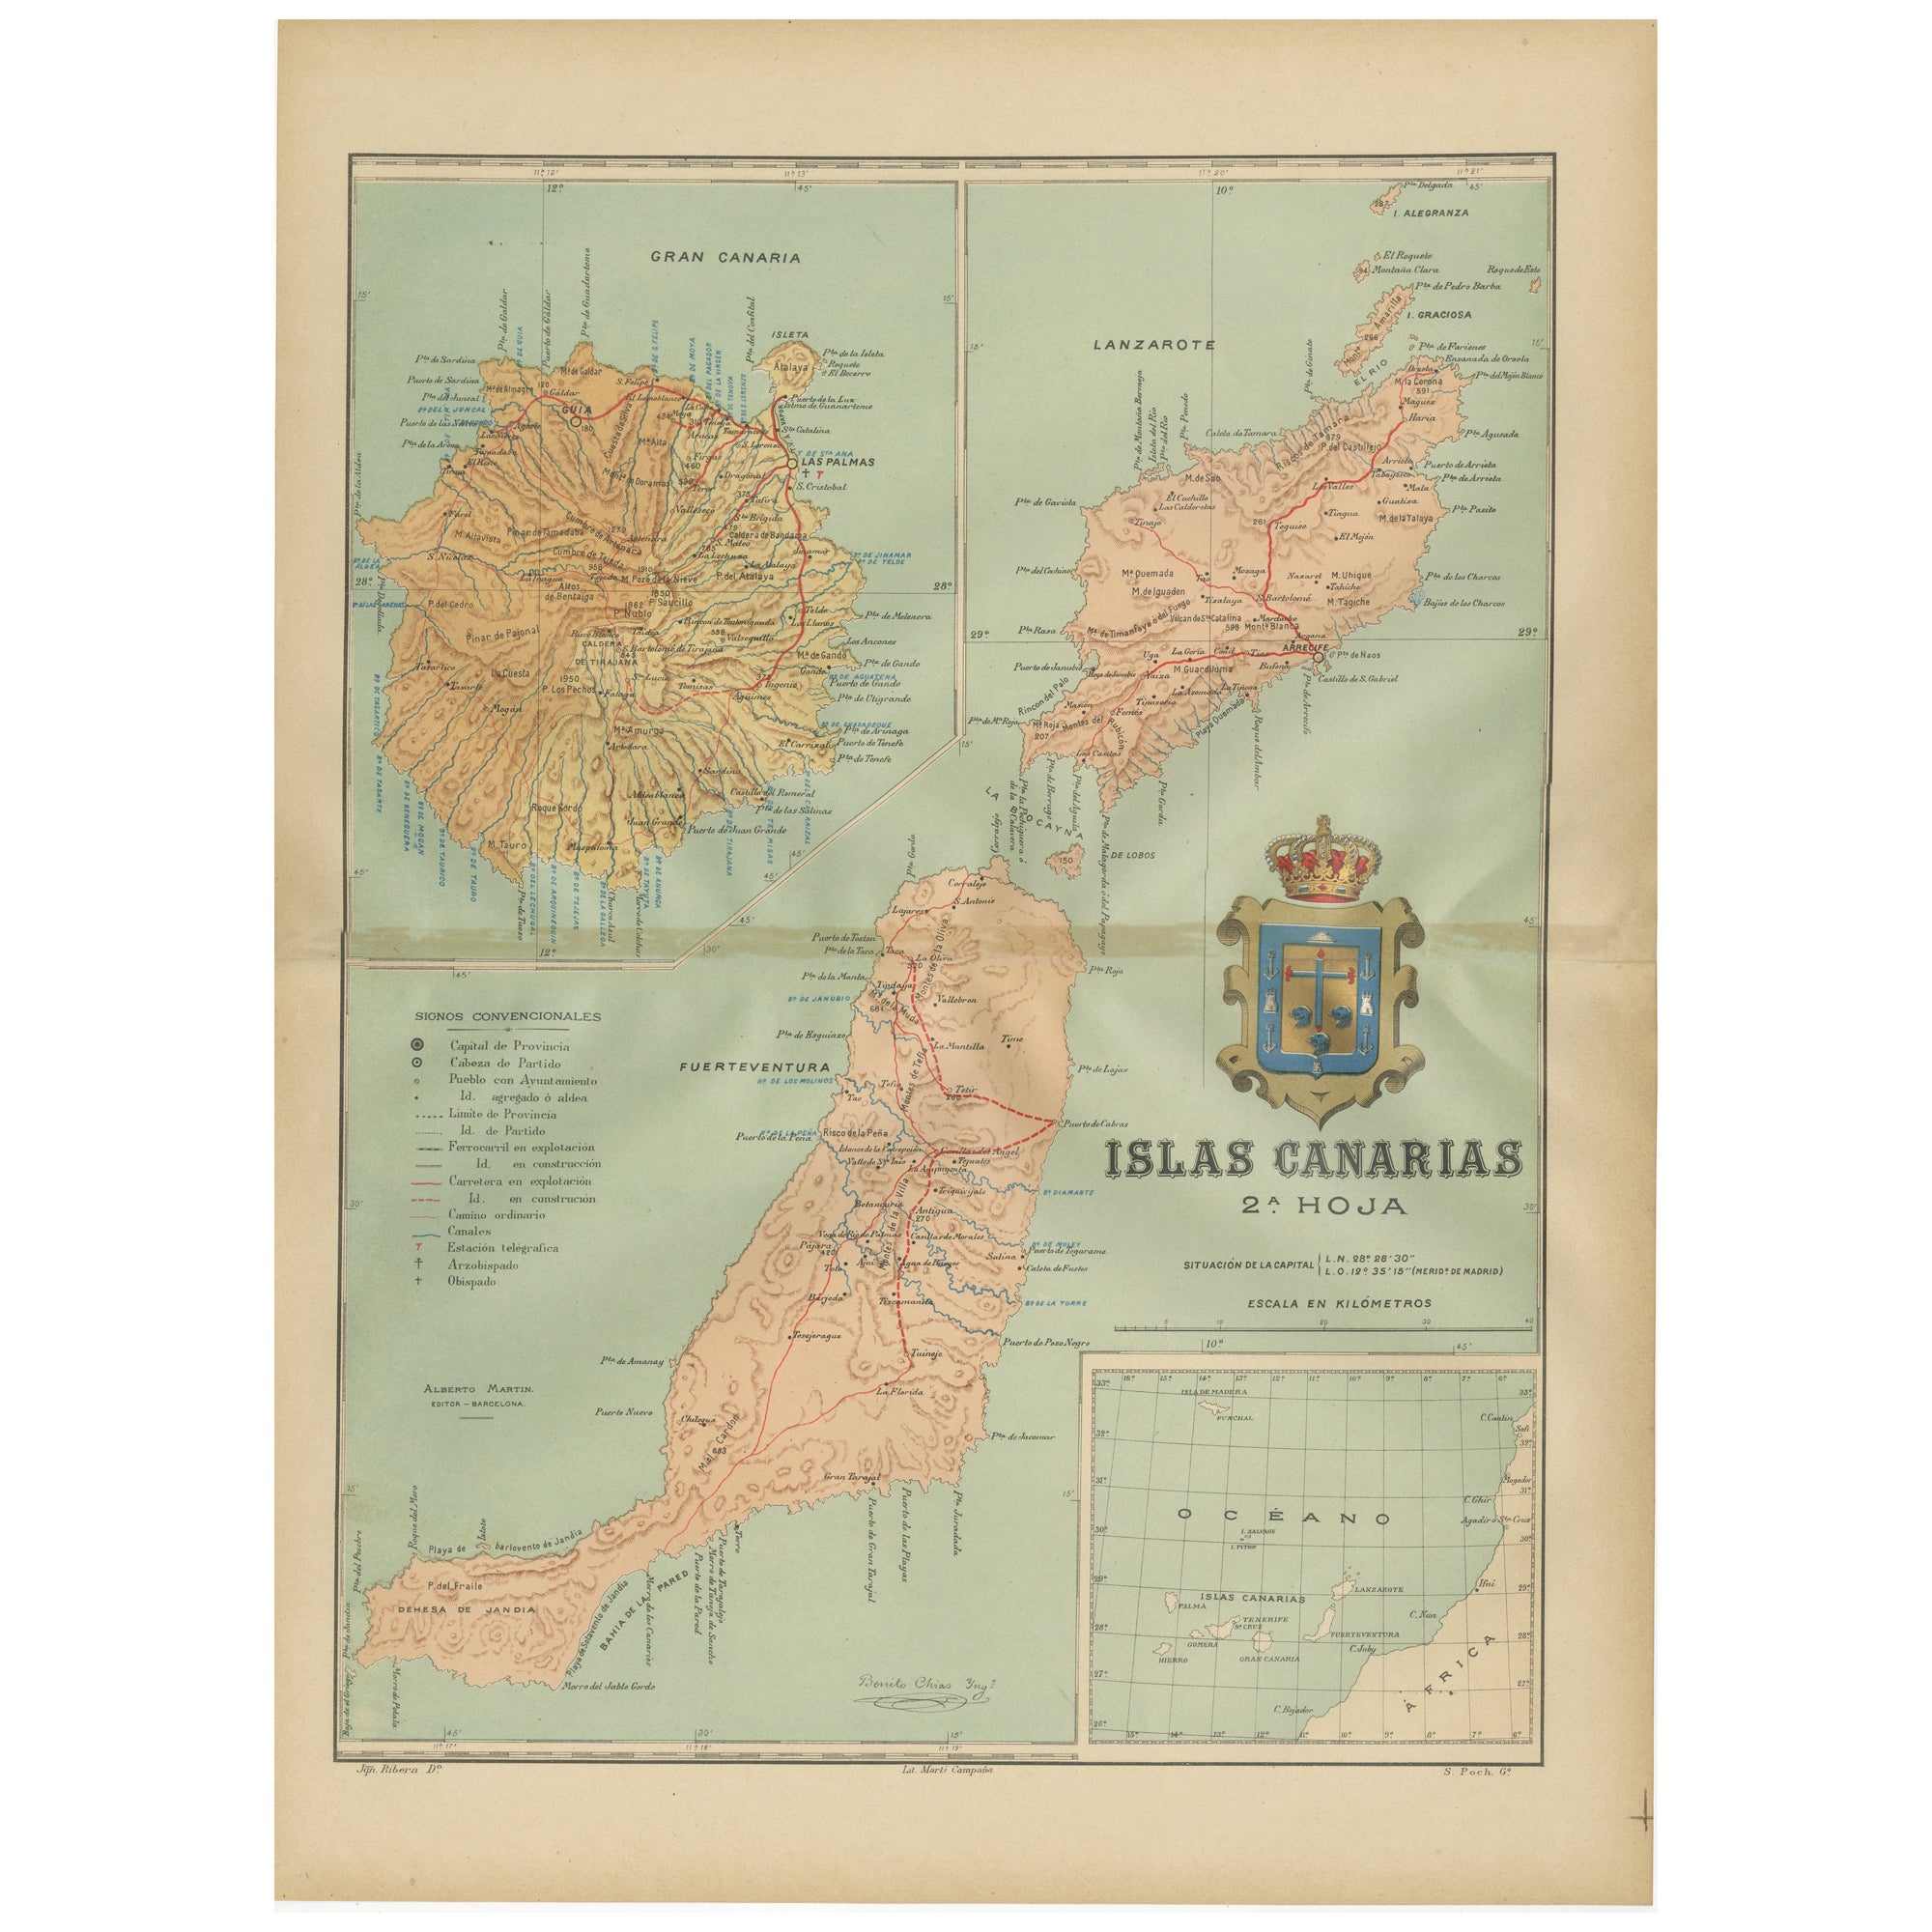 Volcanic Eden: The Canary Islands’ Tapestry of Land and Sea in 1902 For Sale